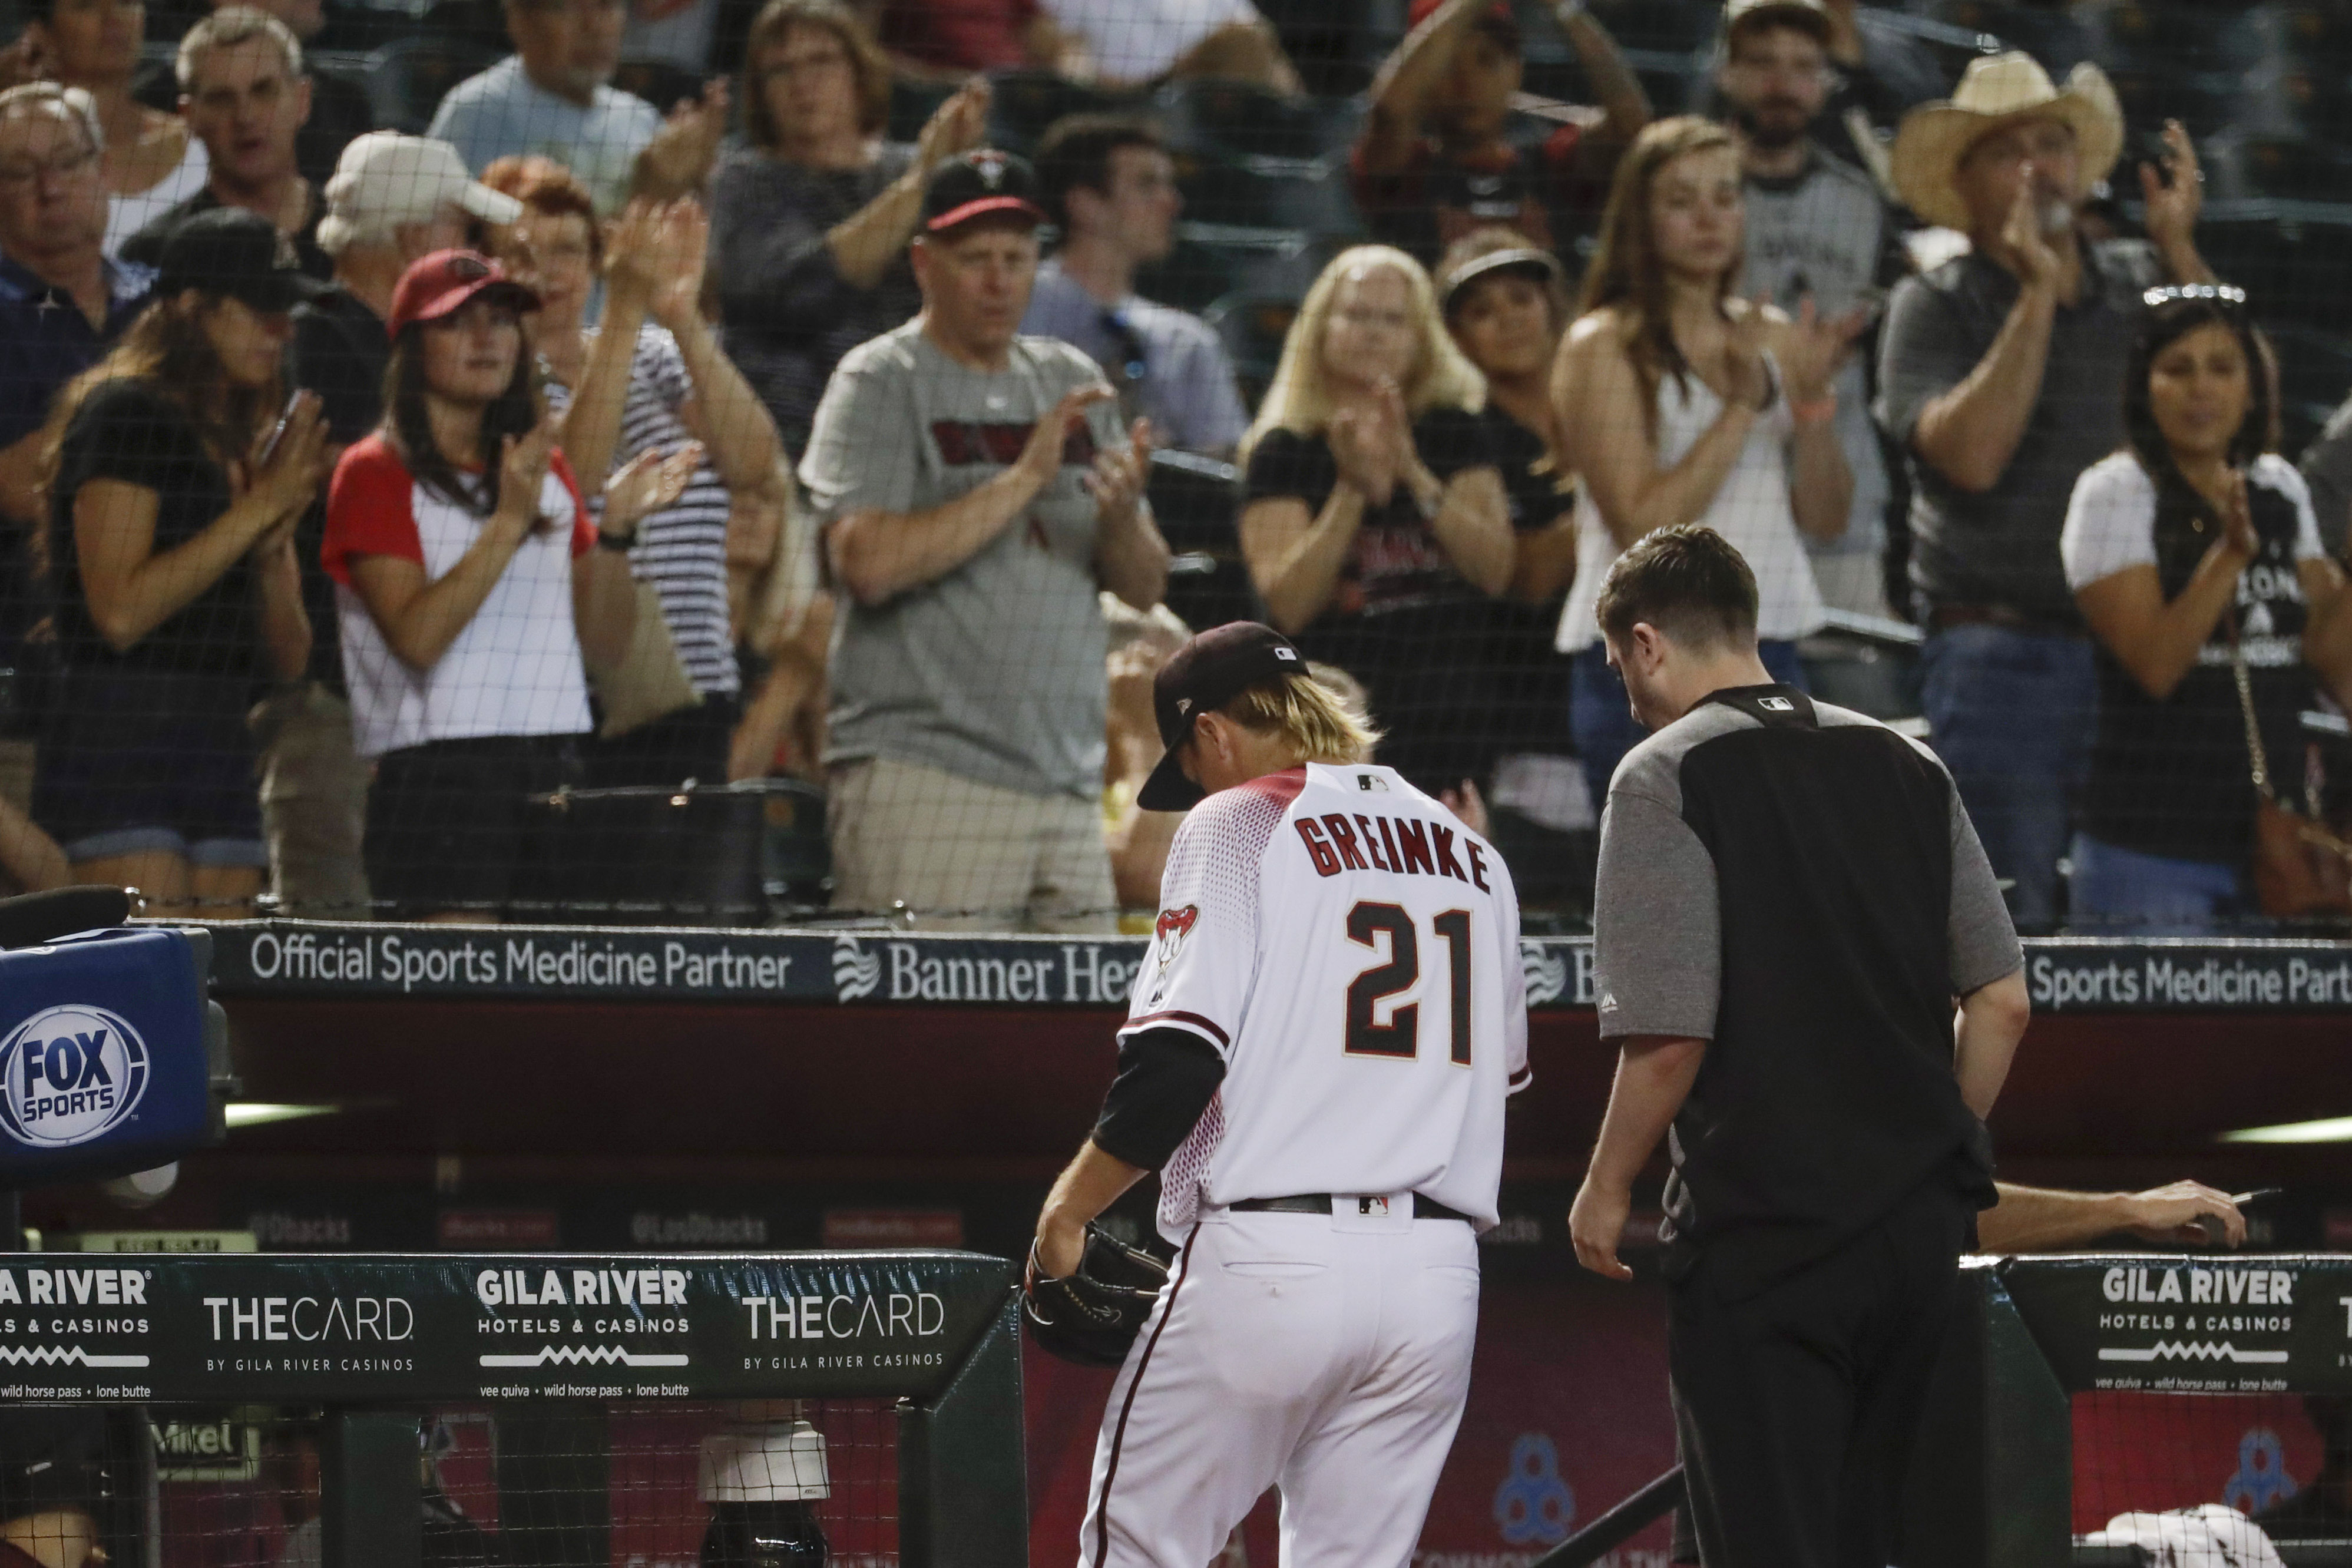 Greinke stars, then exits with trainer, D-backs rout Pirates